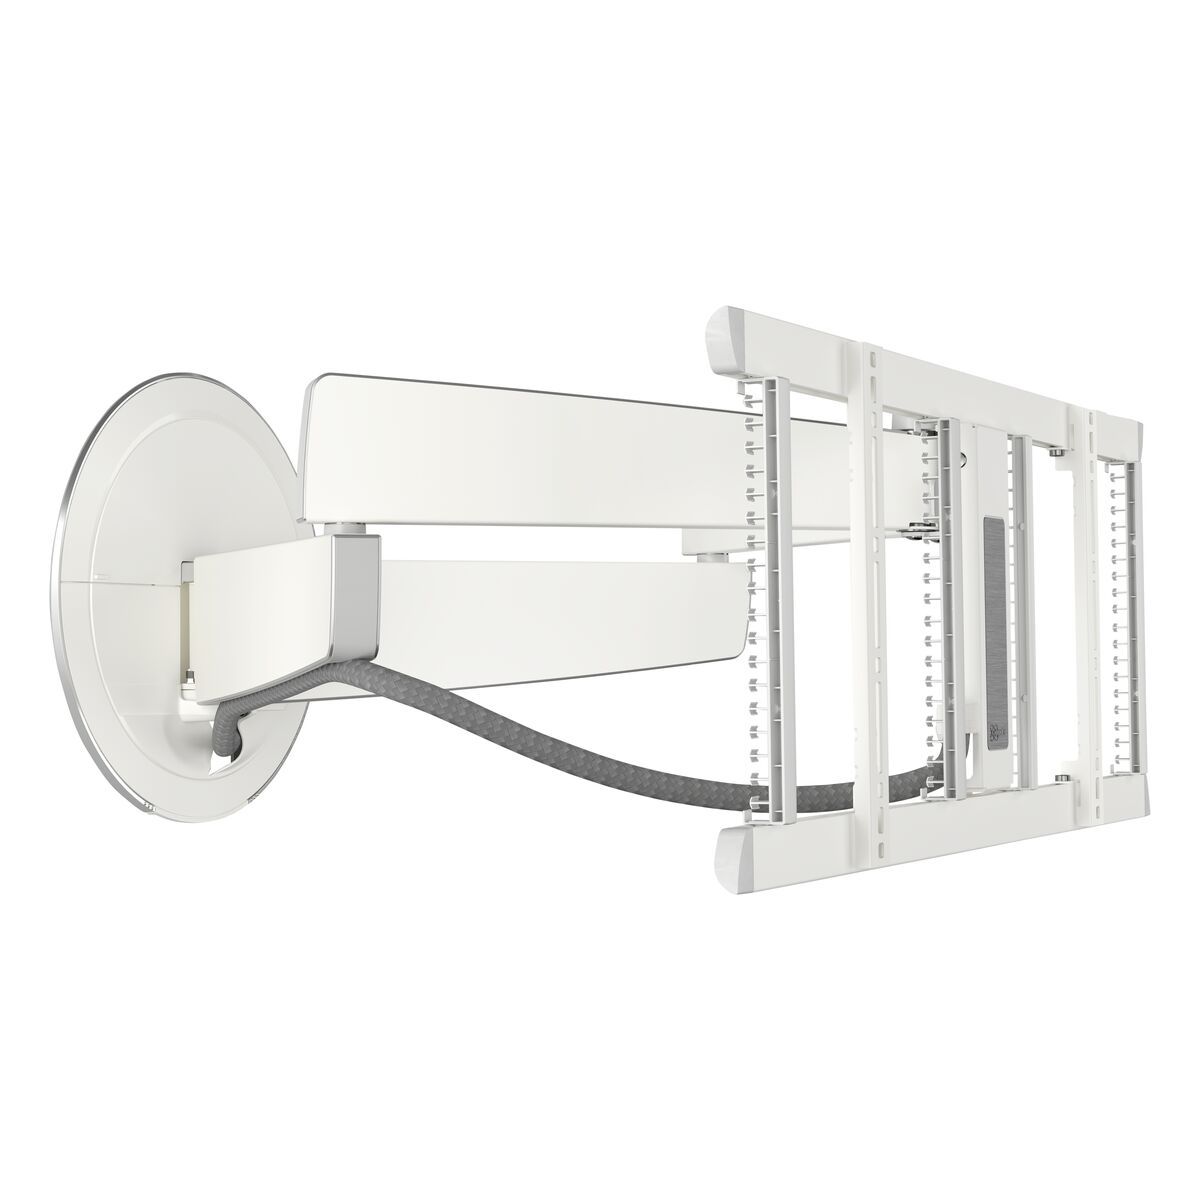 Vogel's TVM 7655 Full-Motion TV Wall Mount (white) - Suitable for 40 up to 77 inch TVs up to 35 kg - Forward and turning motion (up to 120°) - Product